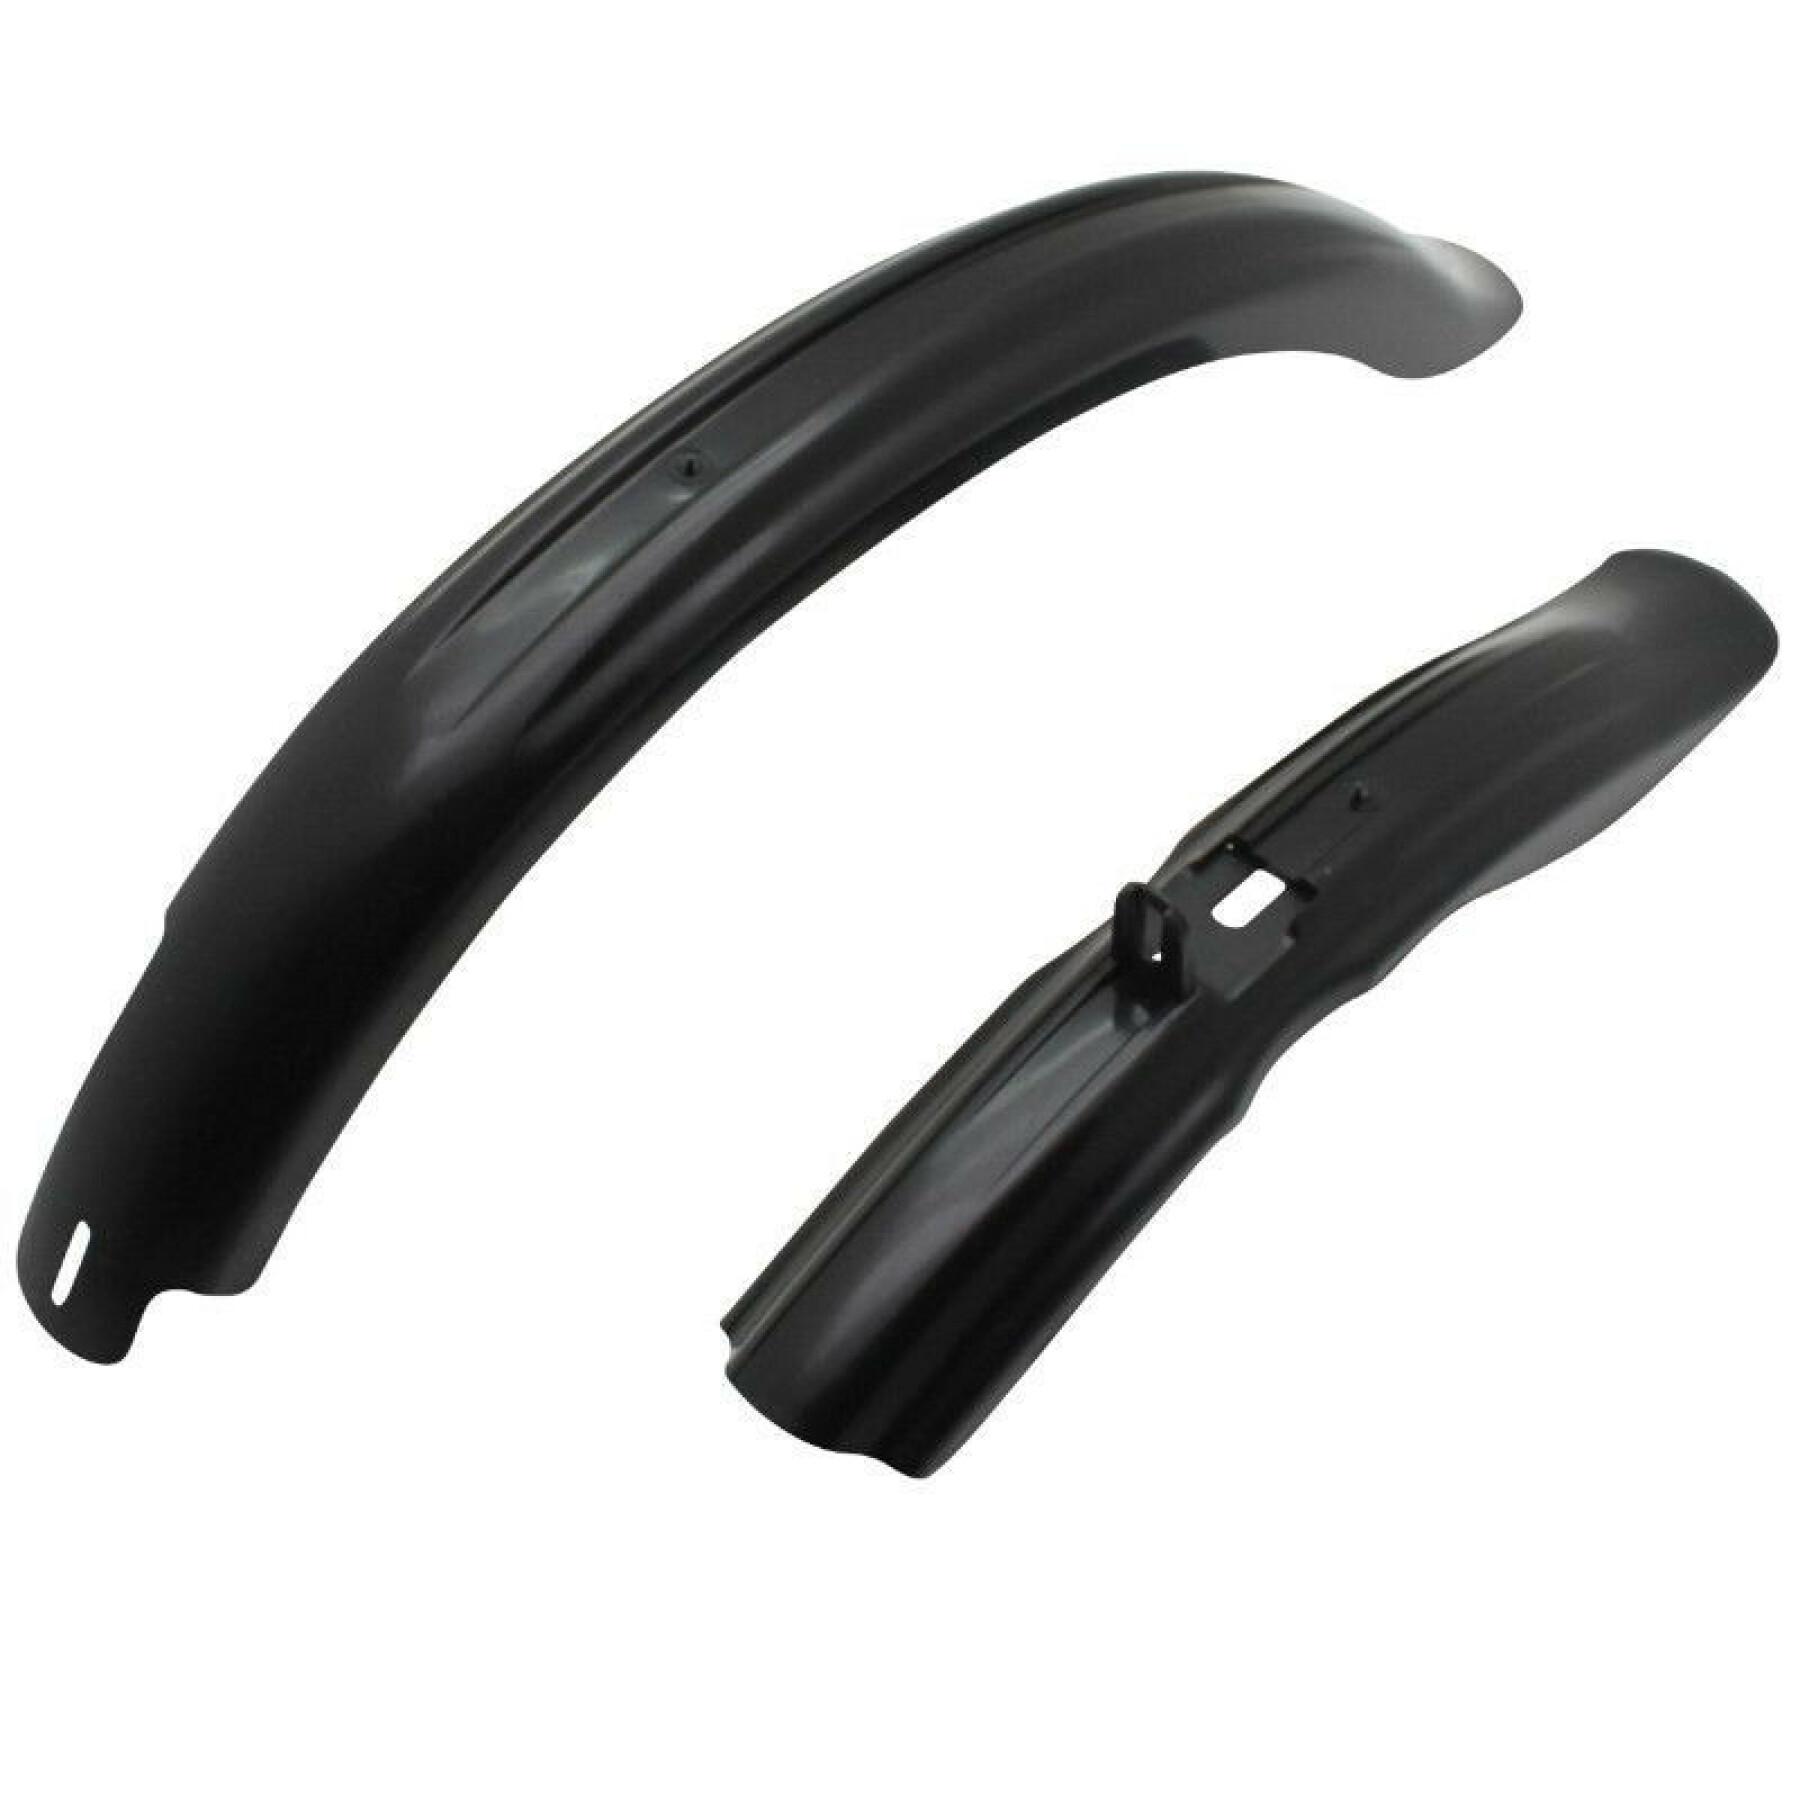 Pair of front and rear mudguards for children P2R 20"